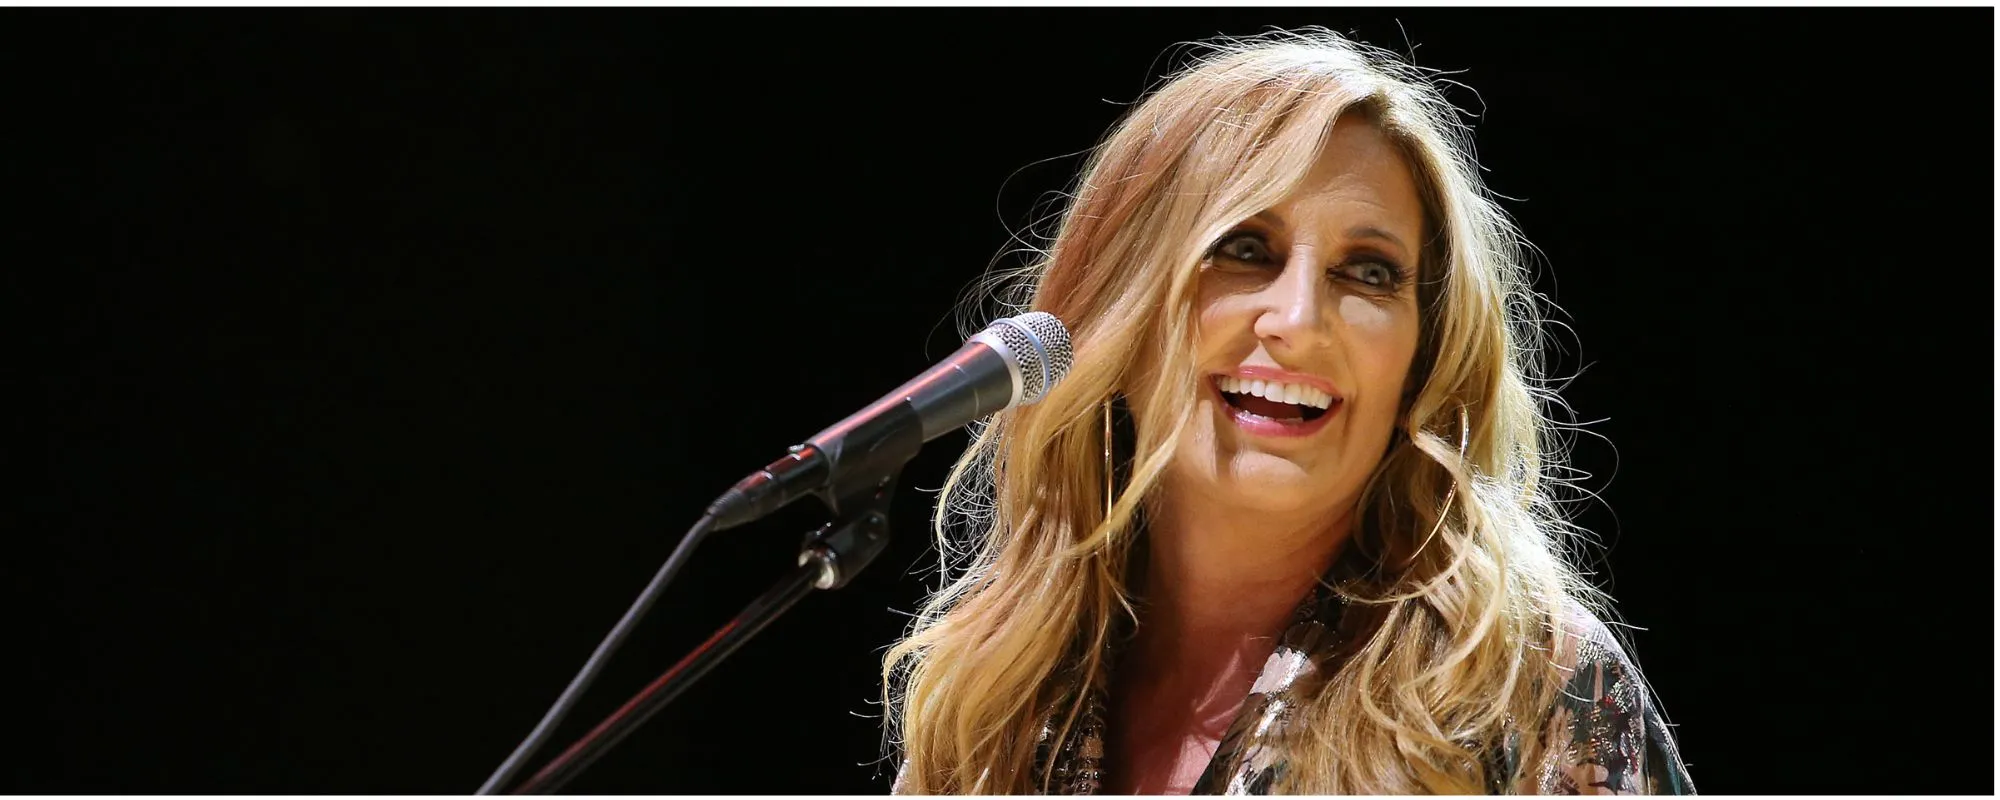 Meet the Writers Behind Lee Ann Womack’s Crossover Hit “I Hope You Dance”